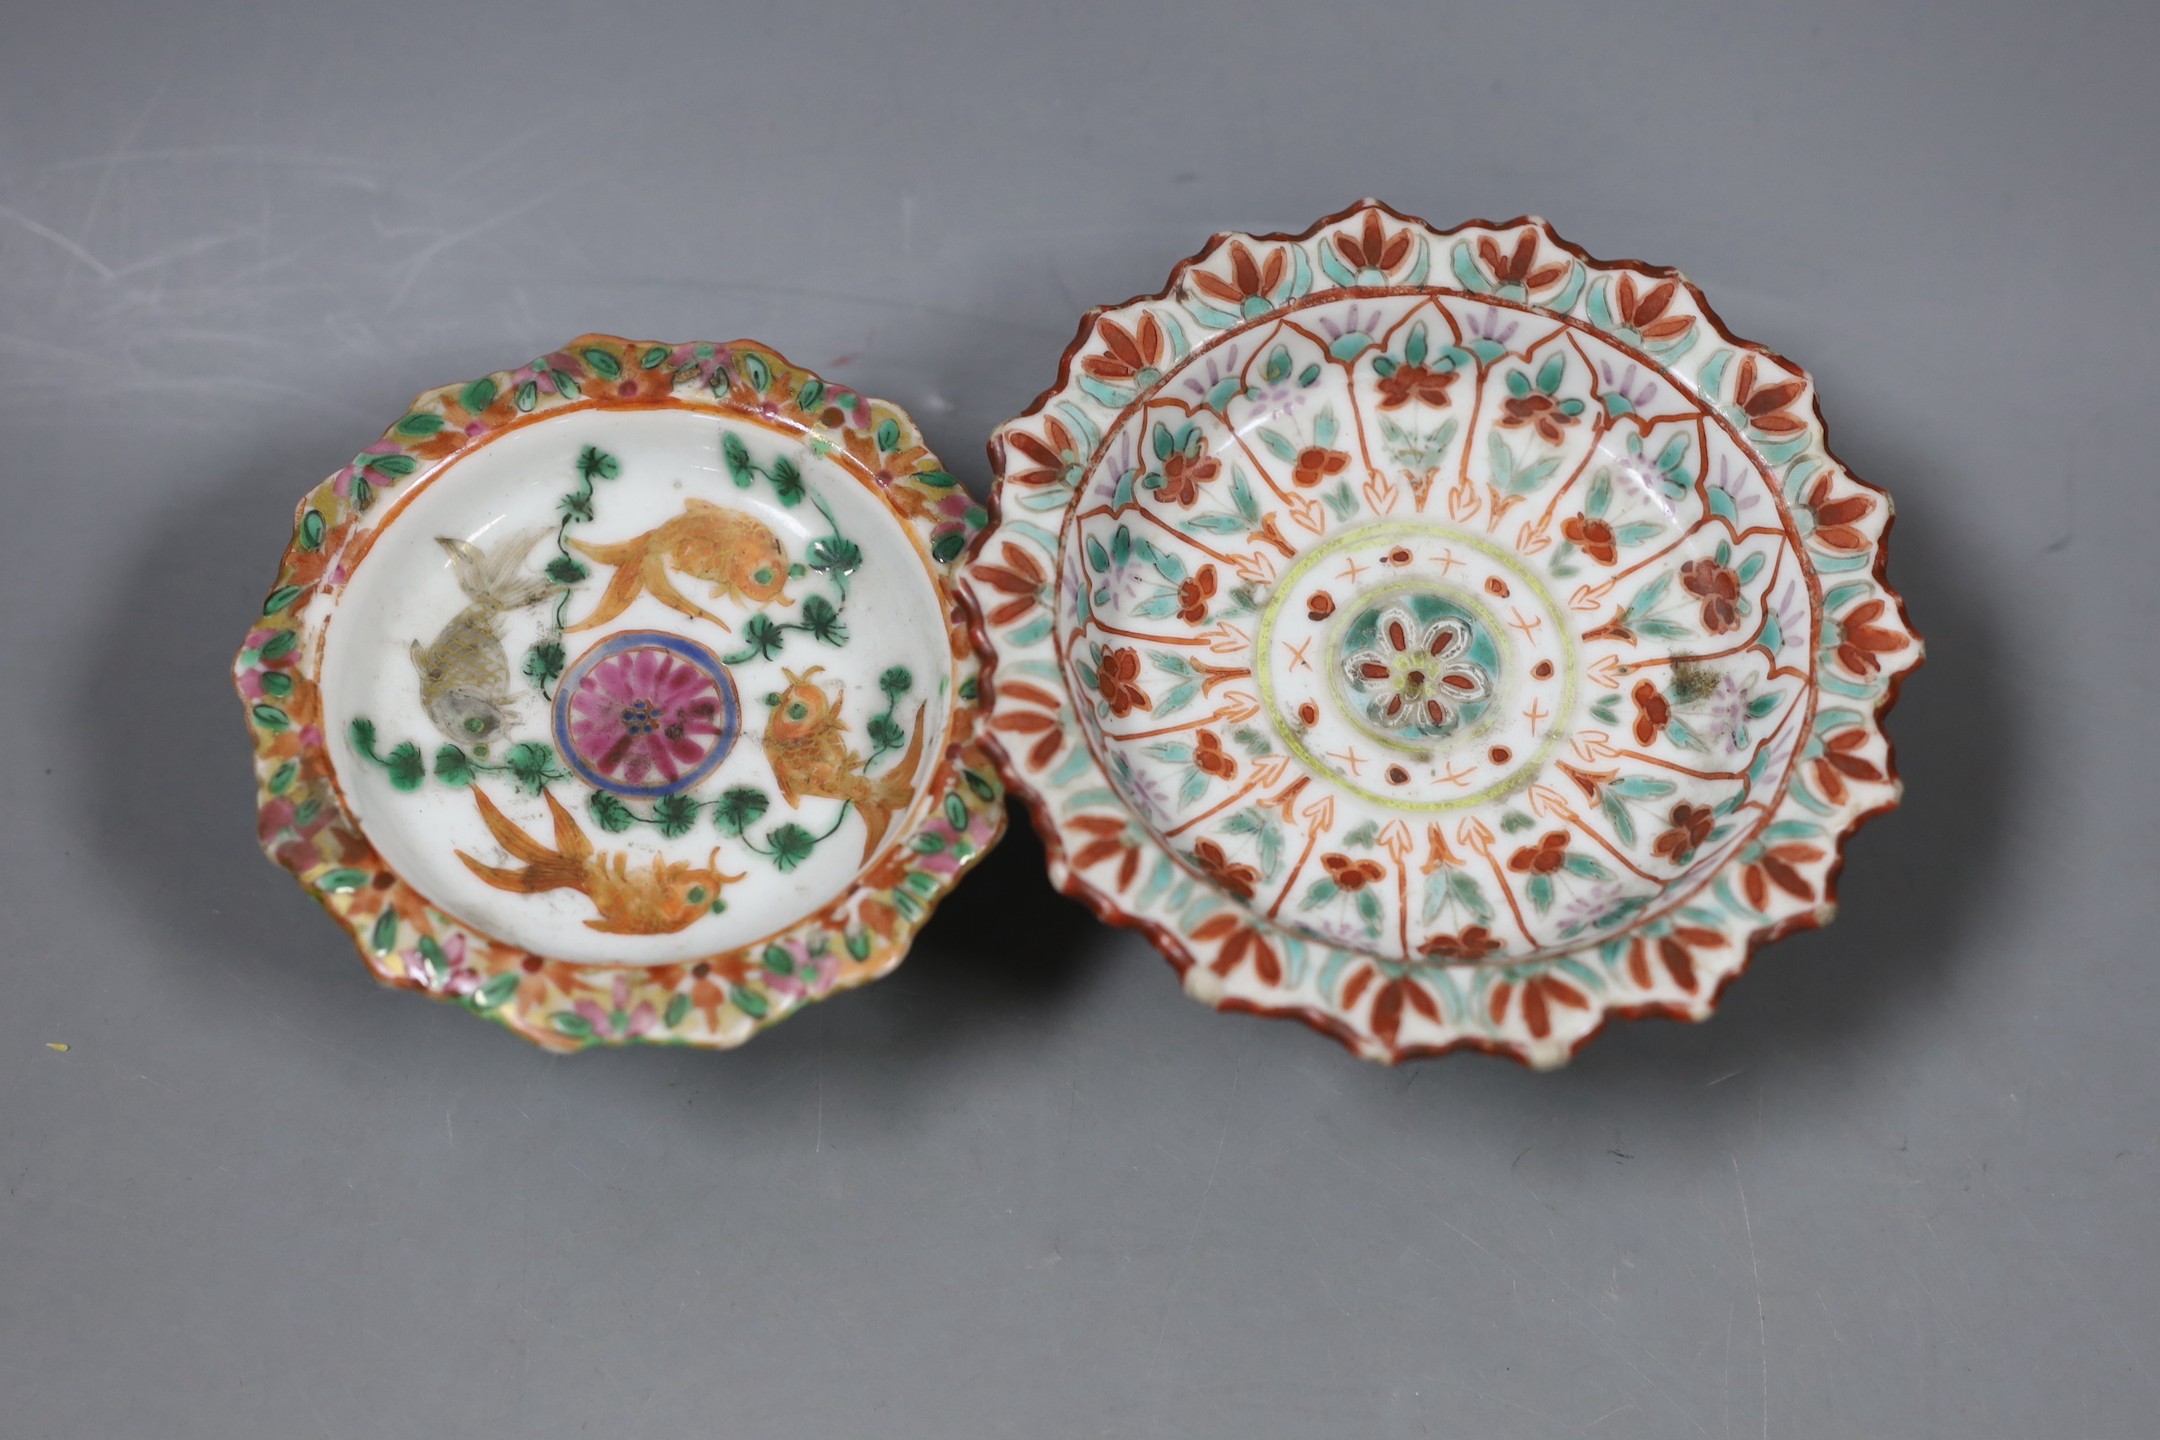 A Chinese Straits enamelled porcelain stem dish, together with a smaller footed koi famille rose stem dish, both late 19th/early 20th century, Largest 12cm diameter